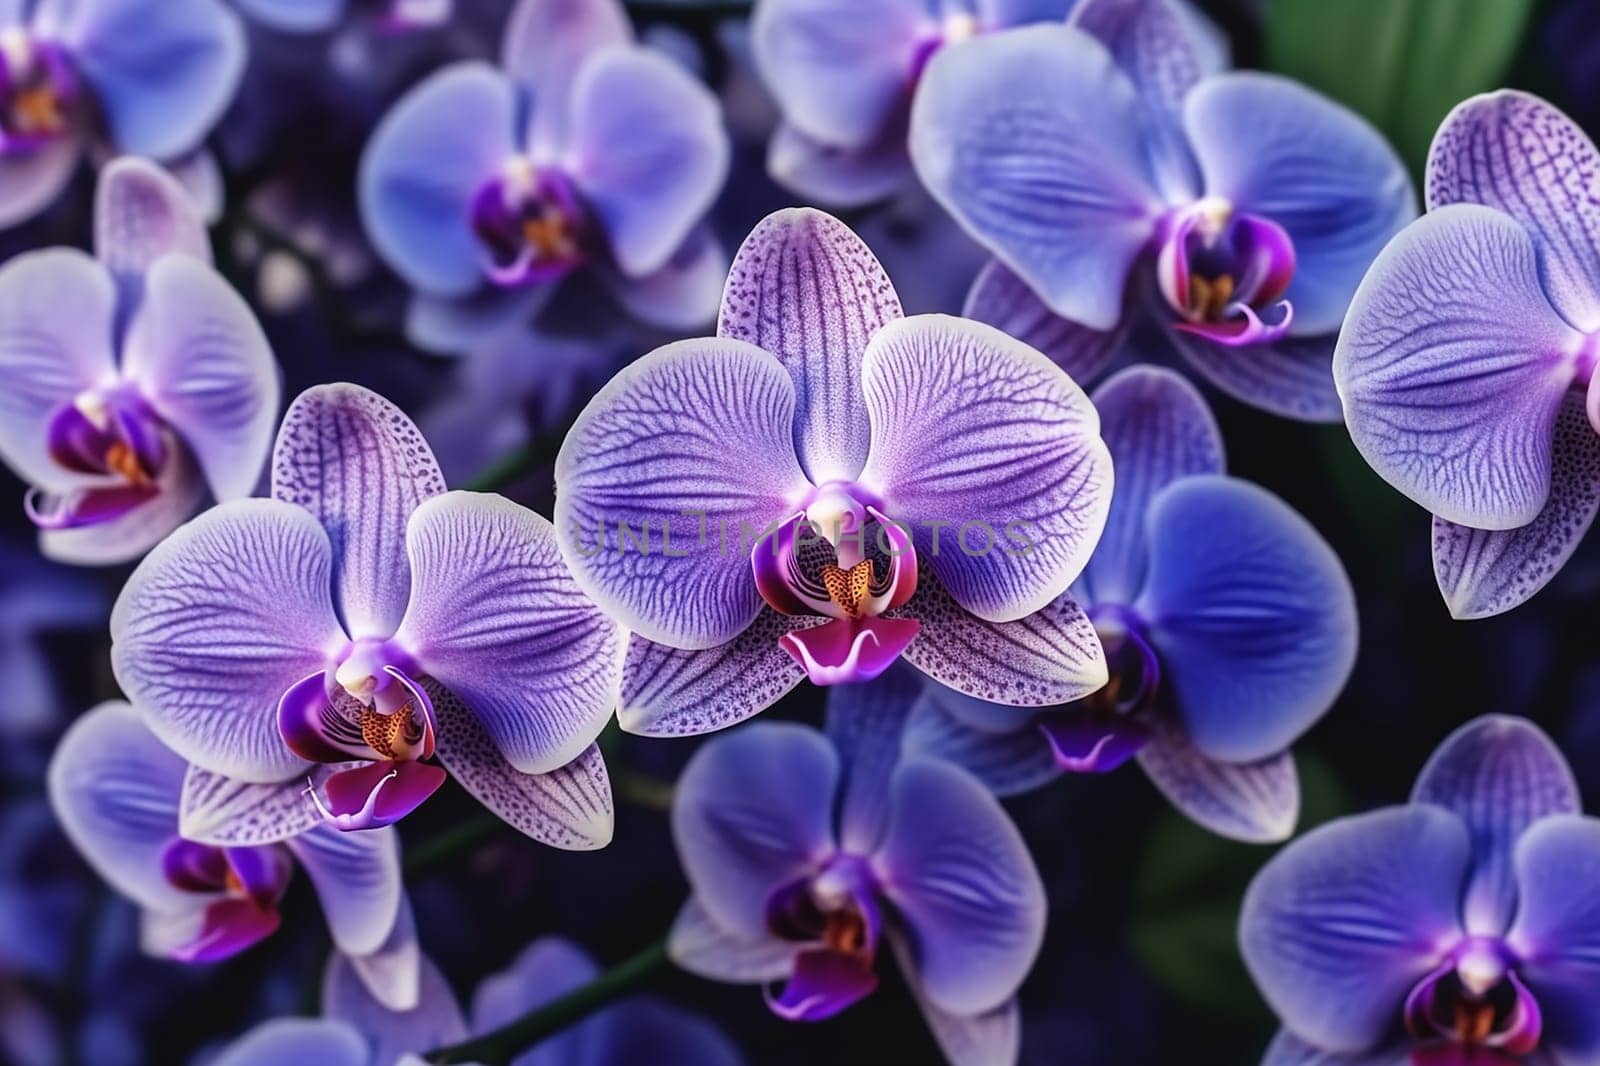 Close up of vibrant purple and white orchids with delicate patterns. by Hype2art